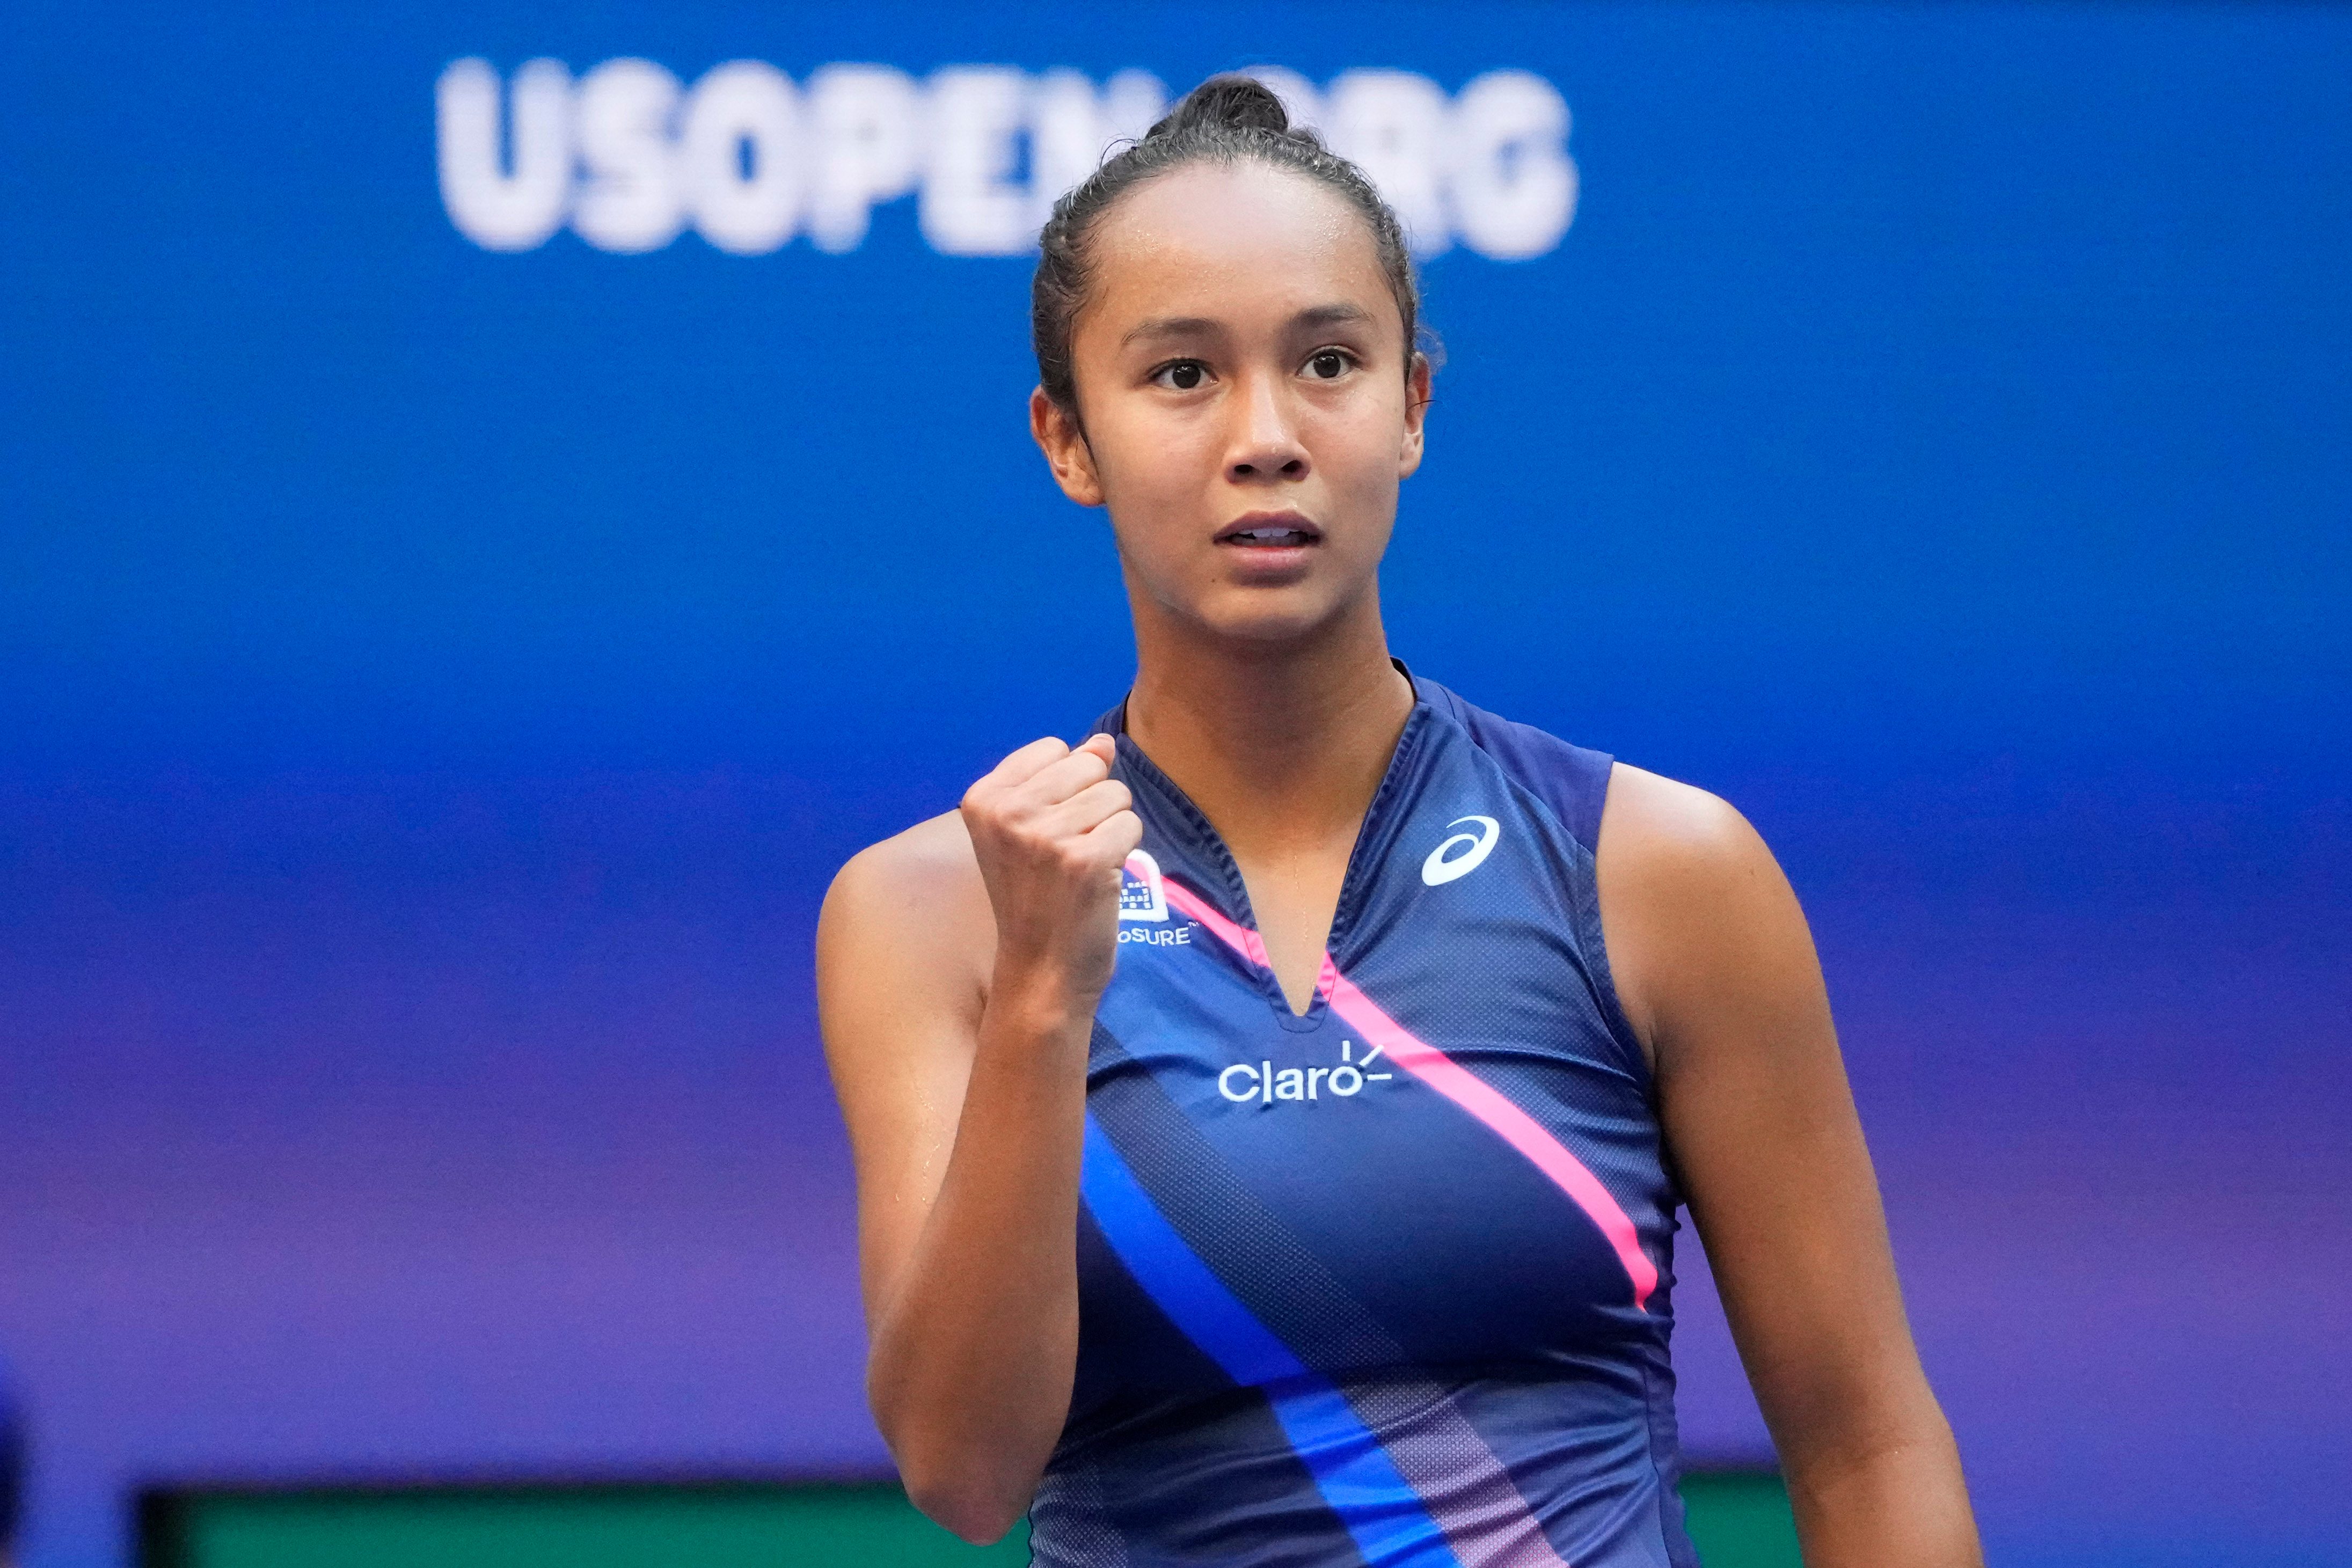 Leylah Fernandez eager to return to action after Sharapova pep talk